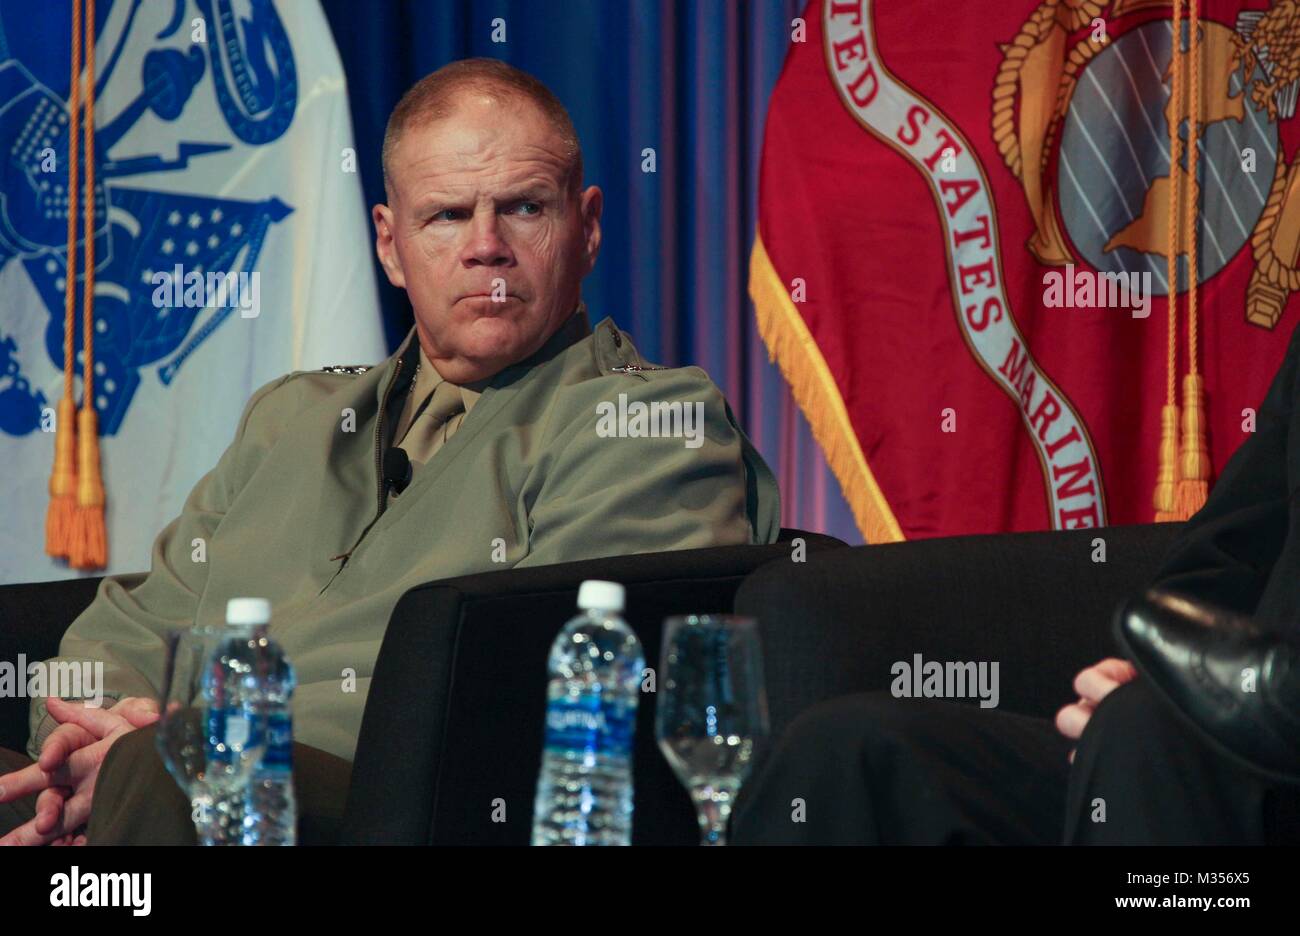 Commandant of the Marine Corps Gen. Robert B. Neller speaks to military service members and attendees at the Sea Service Chiefs Town Hall Luncheon at the San Diego Convention Center, San Diego, Calif., February 8, 2018. Neller spoke about the Marine Corps and answered questions from the audience. (U.S. Marine Corps photo by Sgt. Olivia G. Ortiz) Stock Photo